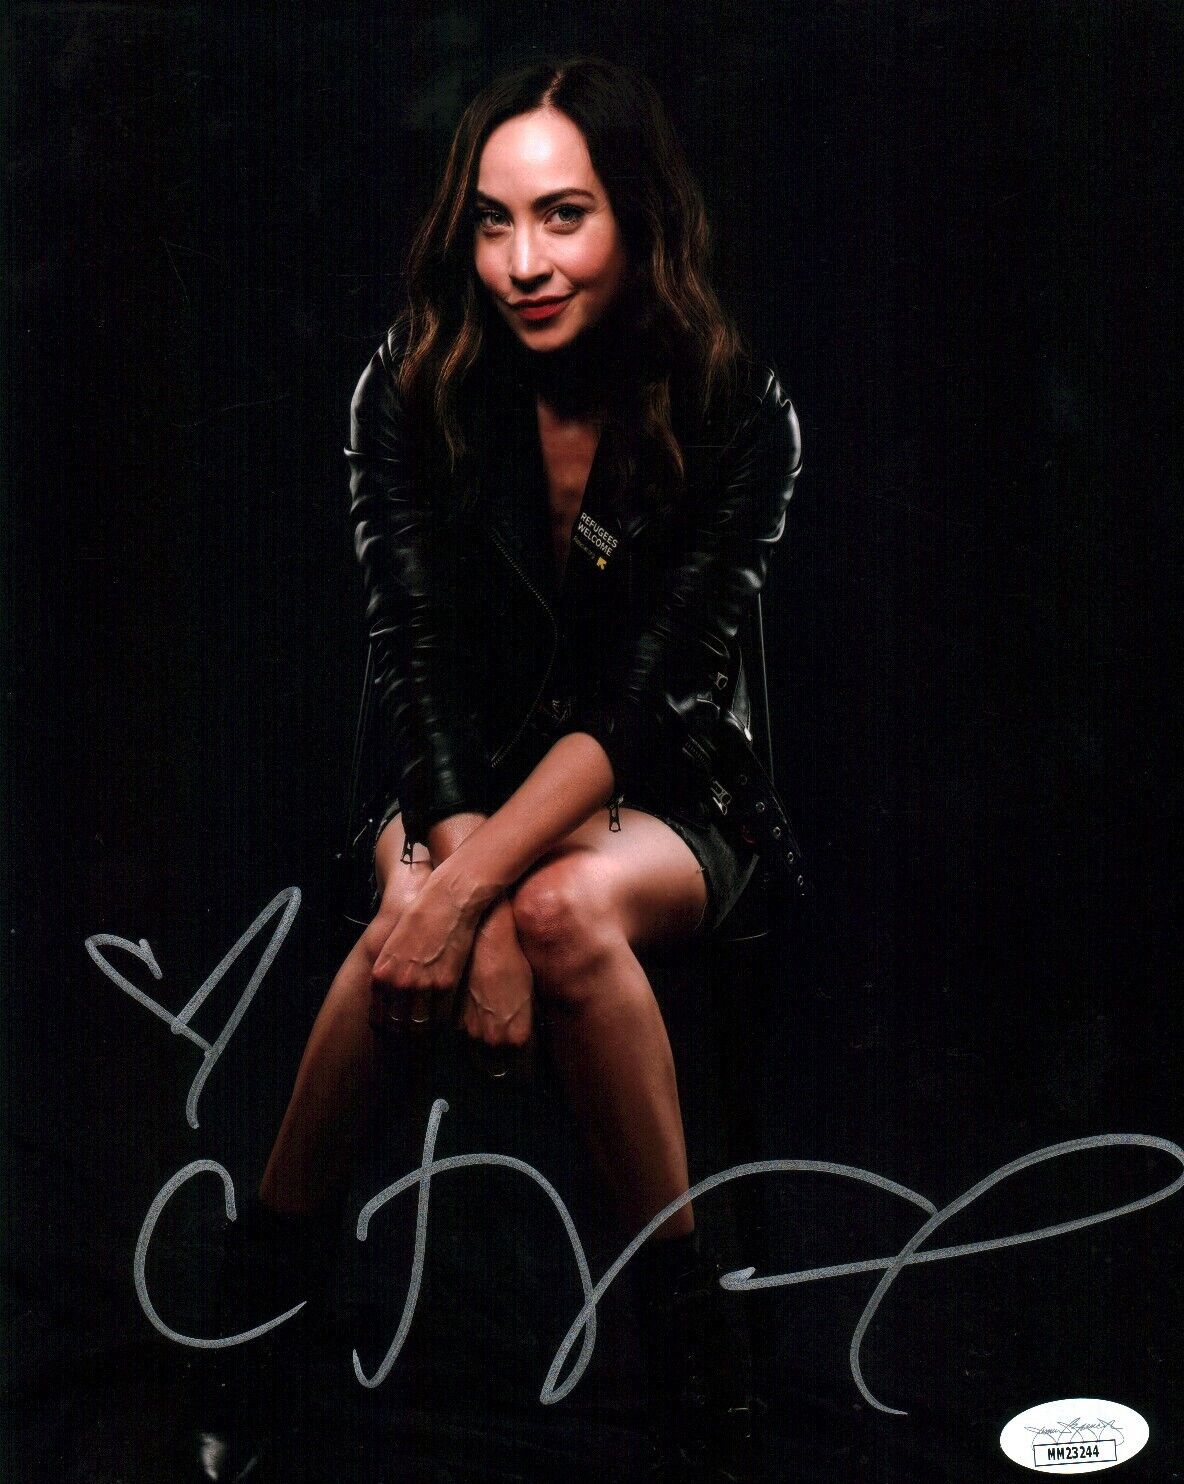 Courtney Ford DC Legends of Tomorrow 8x10 Signed Photo JSA COA Certified Autograph